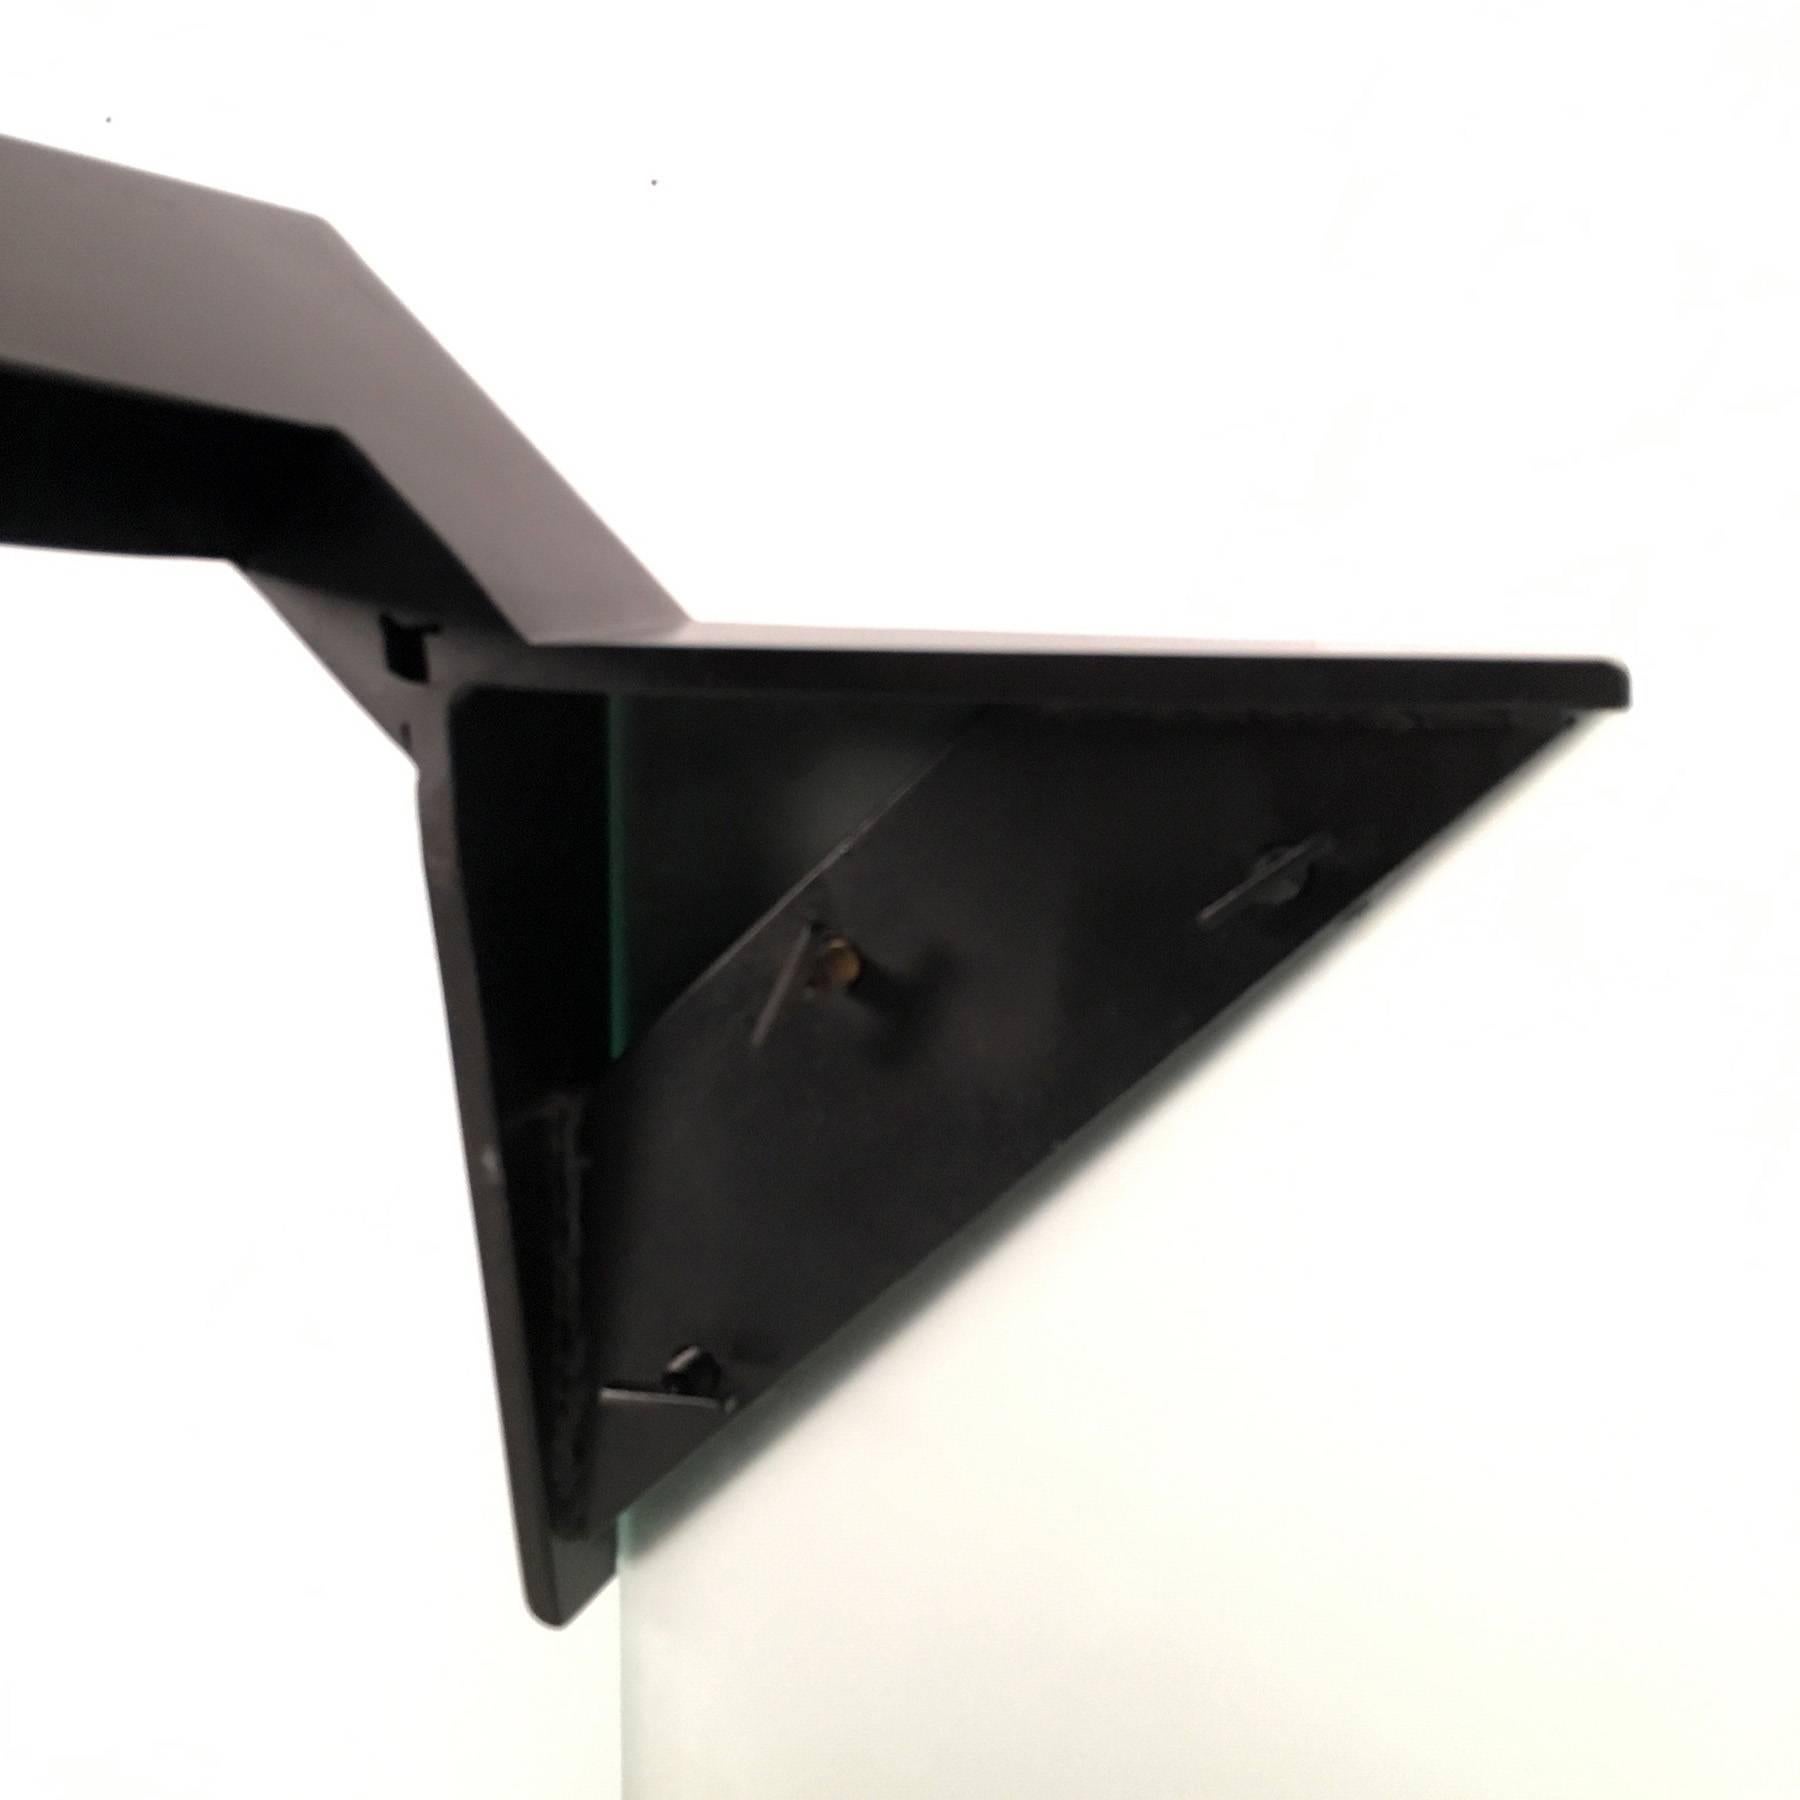 Unusual dining table from the 1980s. The table consists of a square top made of heavy satinated glass, and four legs made of matte black painted steel. The legs are fixed to the top with wing screws. The top can easily be replaced by other materials